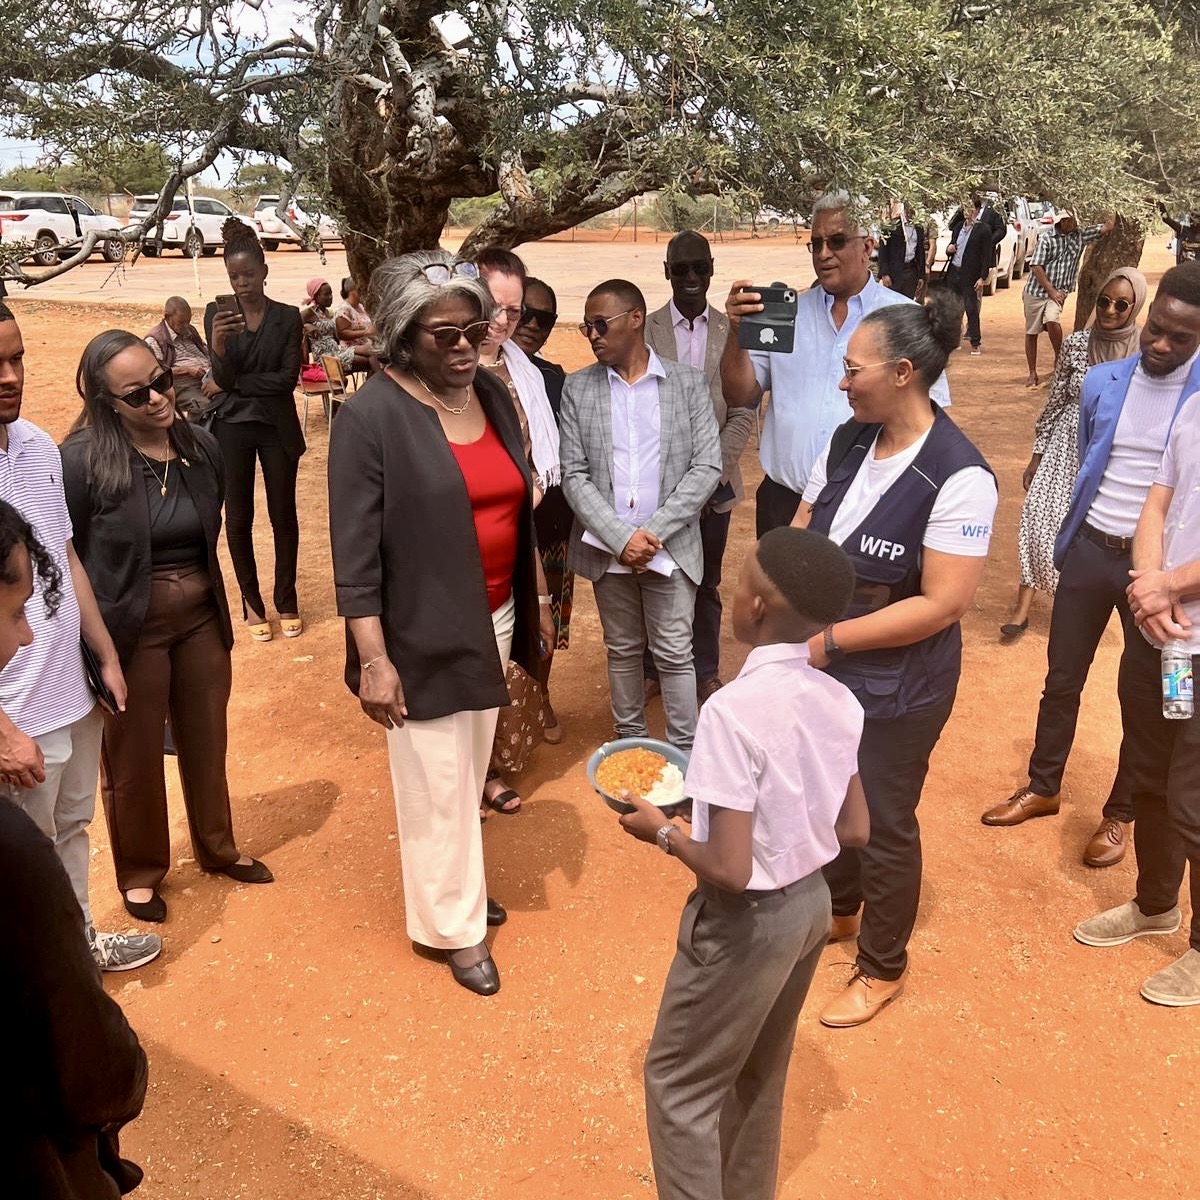 While in Namibia, I had the chance to meet with leaders from @WFP’s Homegrown School Feeding Project, which helps students access nutritious meals and empowers local farmers. The United States is proud to be the world’s largest partner to the World Food Program.